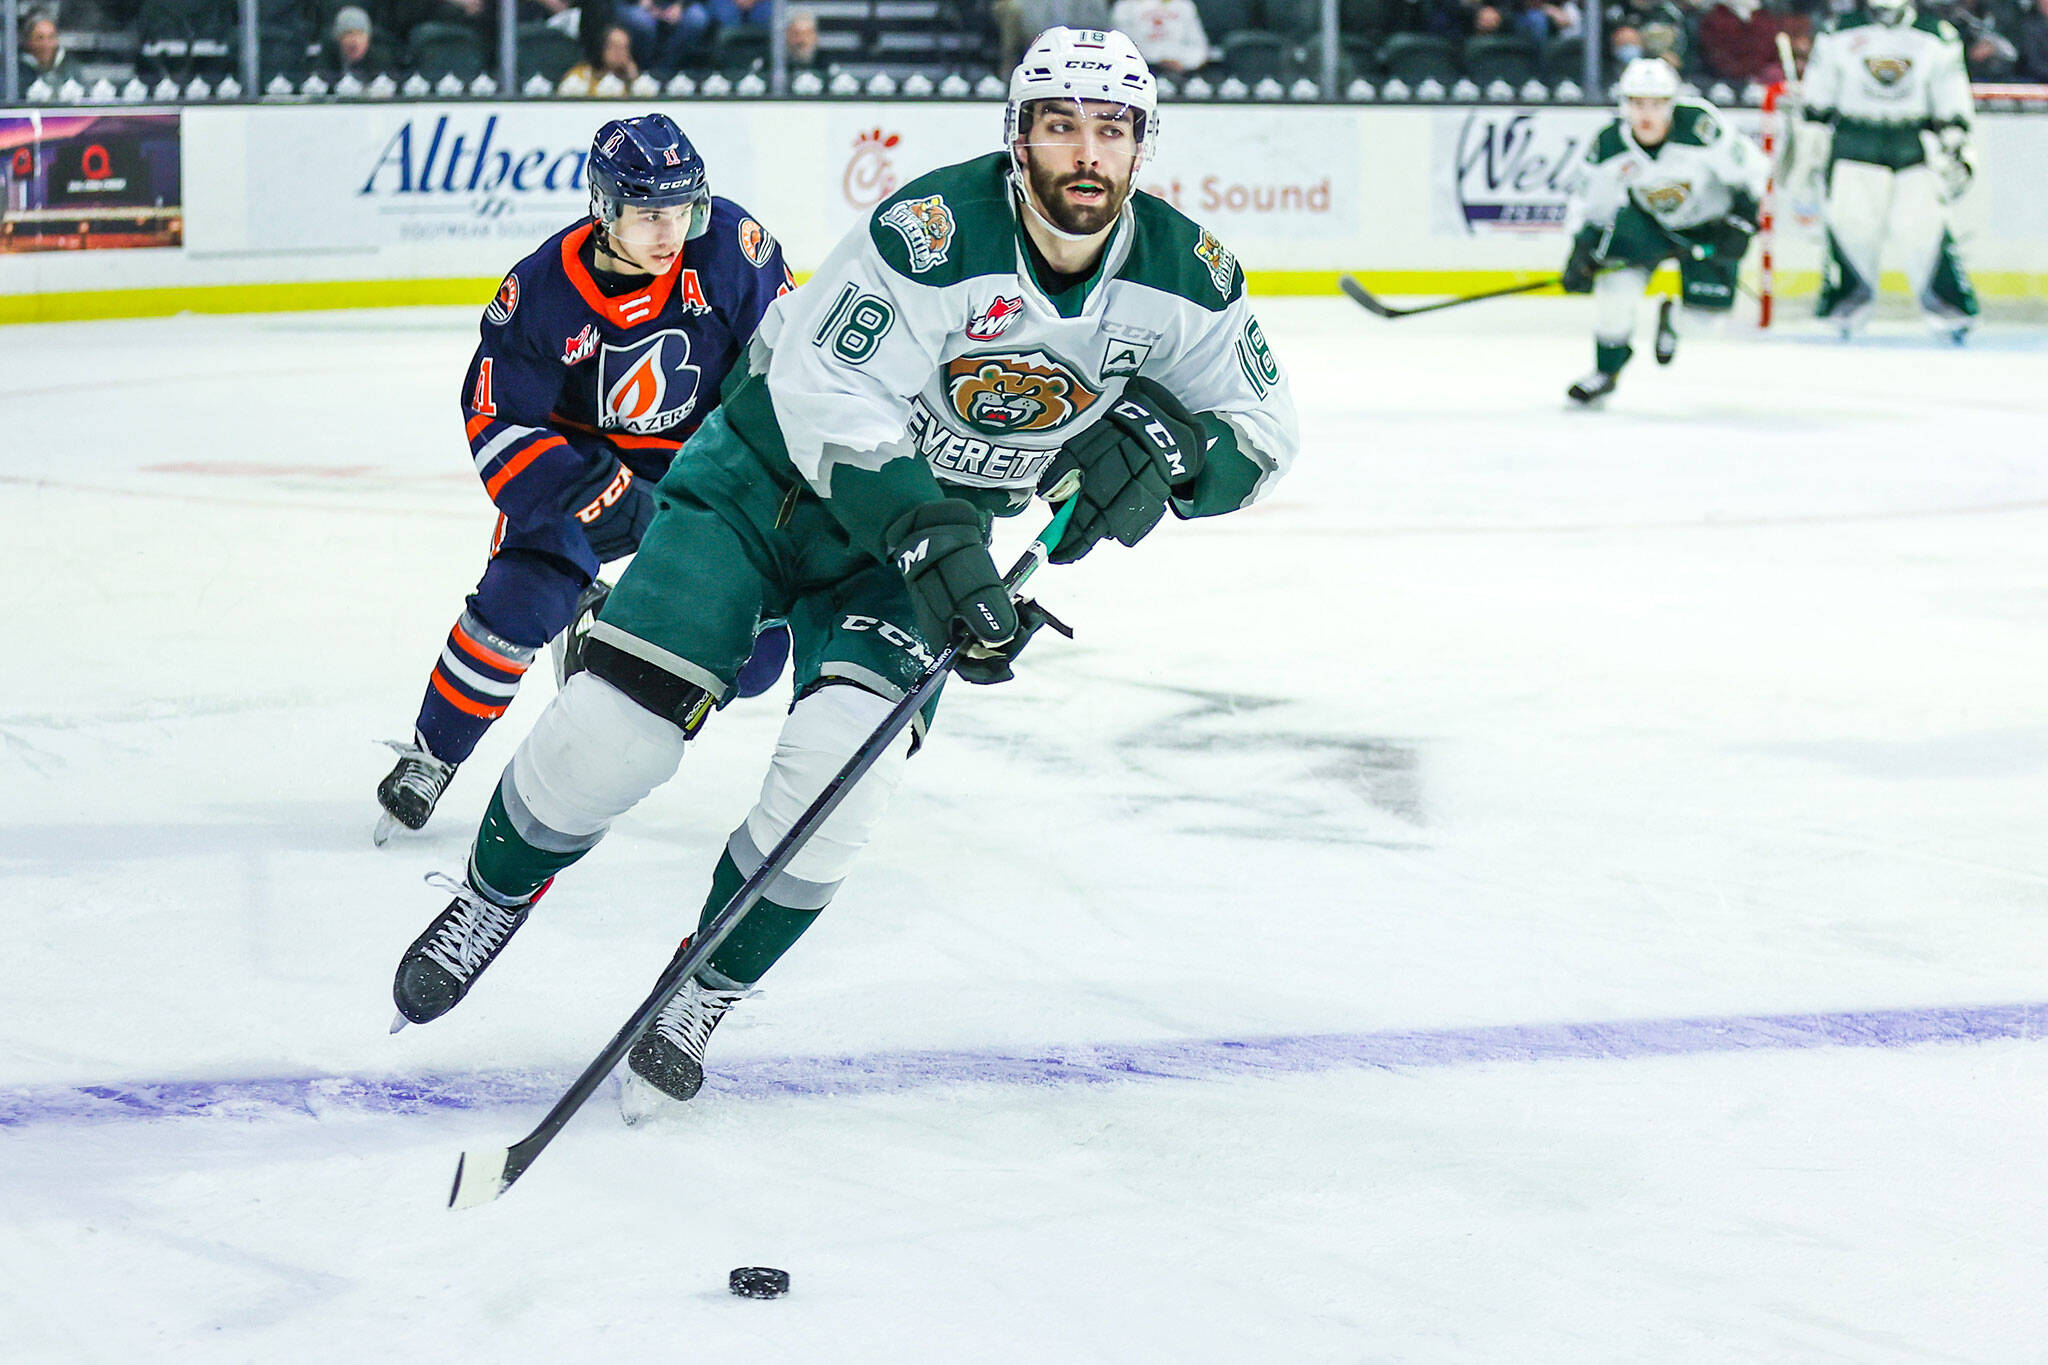 The Silvertips’ Hunter Campbell skates with the puck during a game against the Blazers on Saturday, Feb. 12, 2022, at Angel of the Winds Arena in Everett. (Kristin Ostrowski / Everett Silvertips)